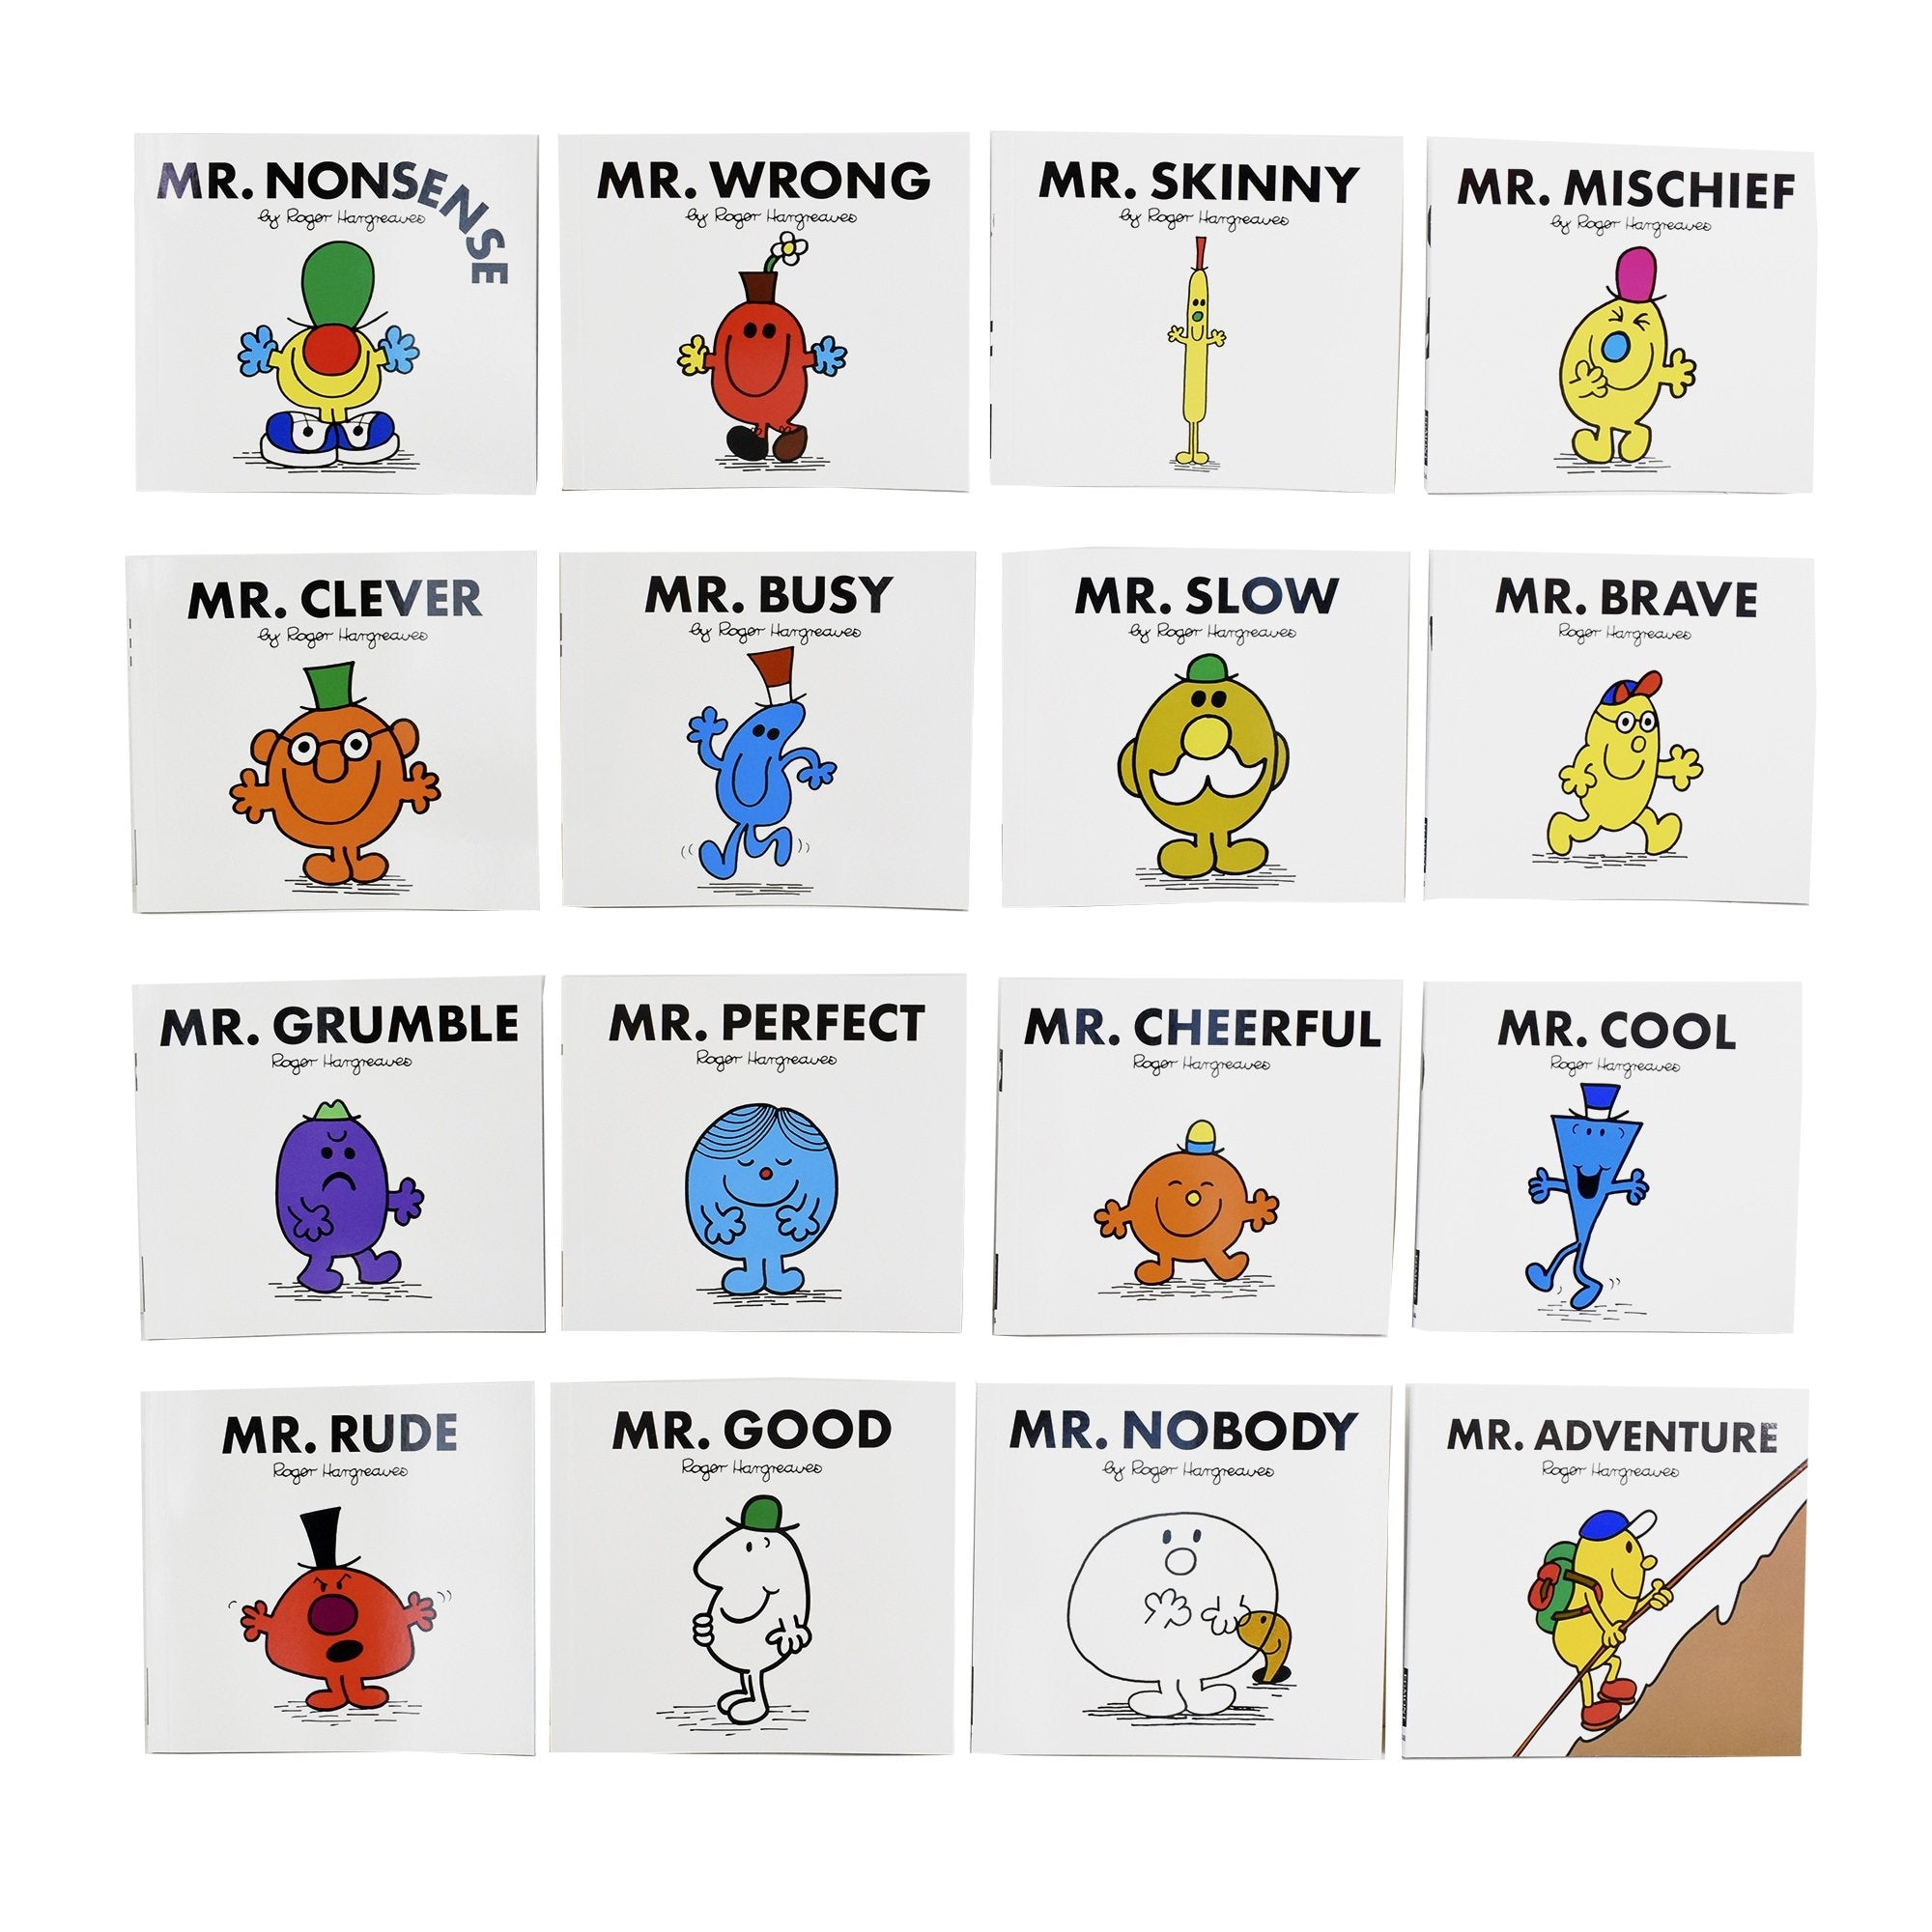 Mr Men My Complete Collection 48 Books Set By Roger Hargreaves